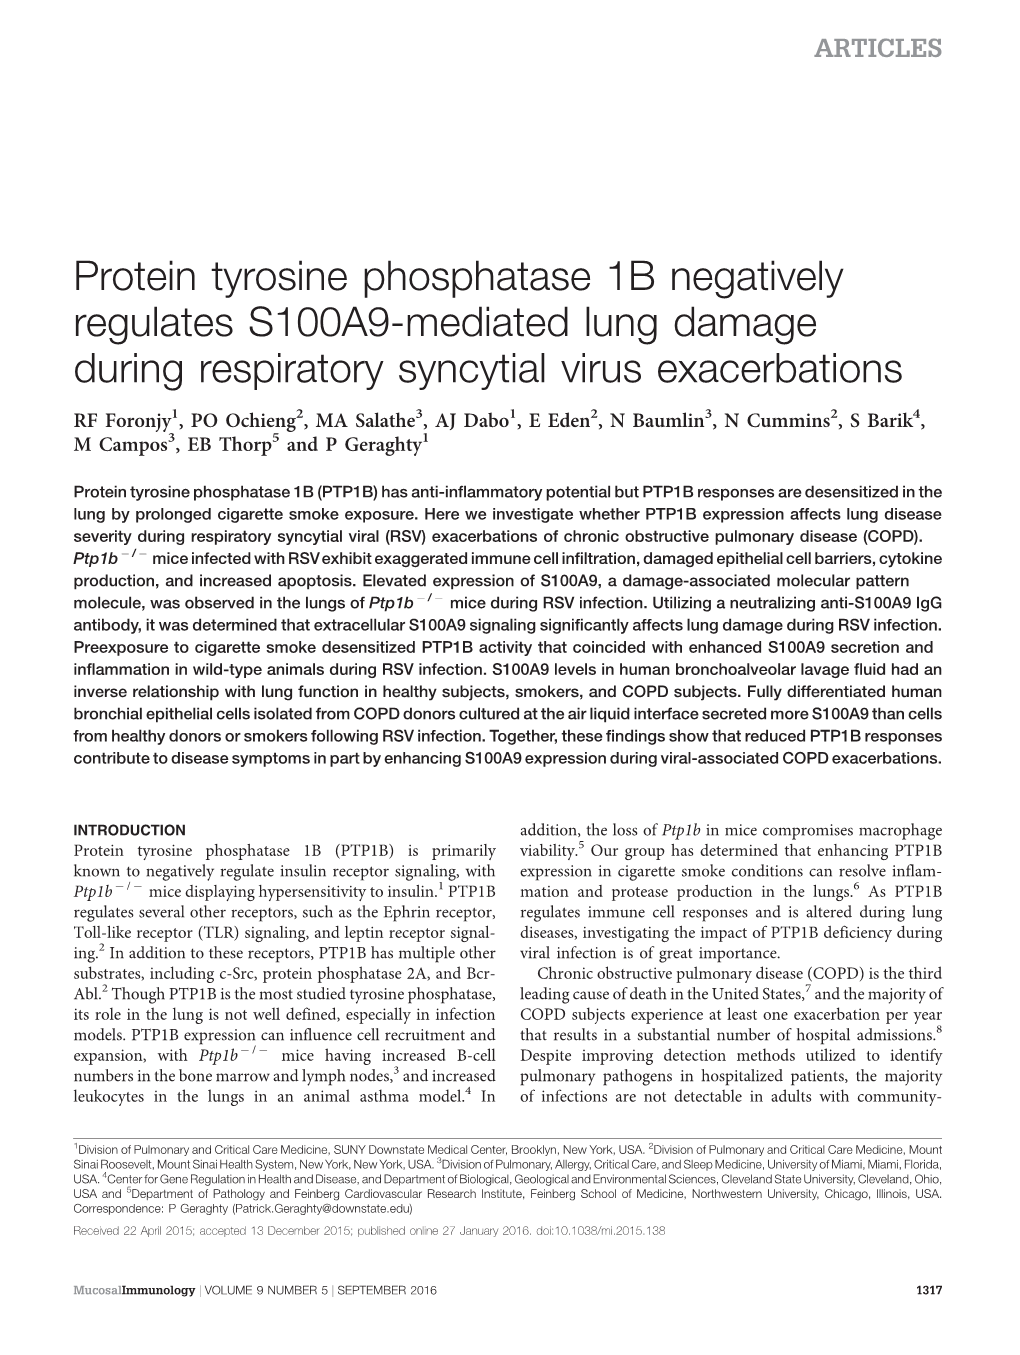 Protein Tyrosine Phosphatase 1B Negatively Regulates S100A9-Mediated Lung Damage During Respiratory Syncytial Virus Exacerbations